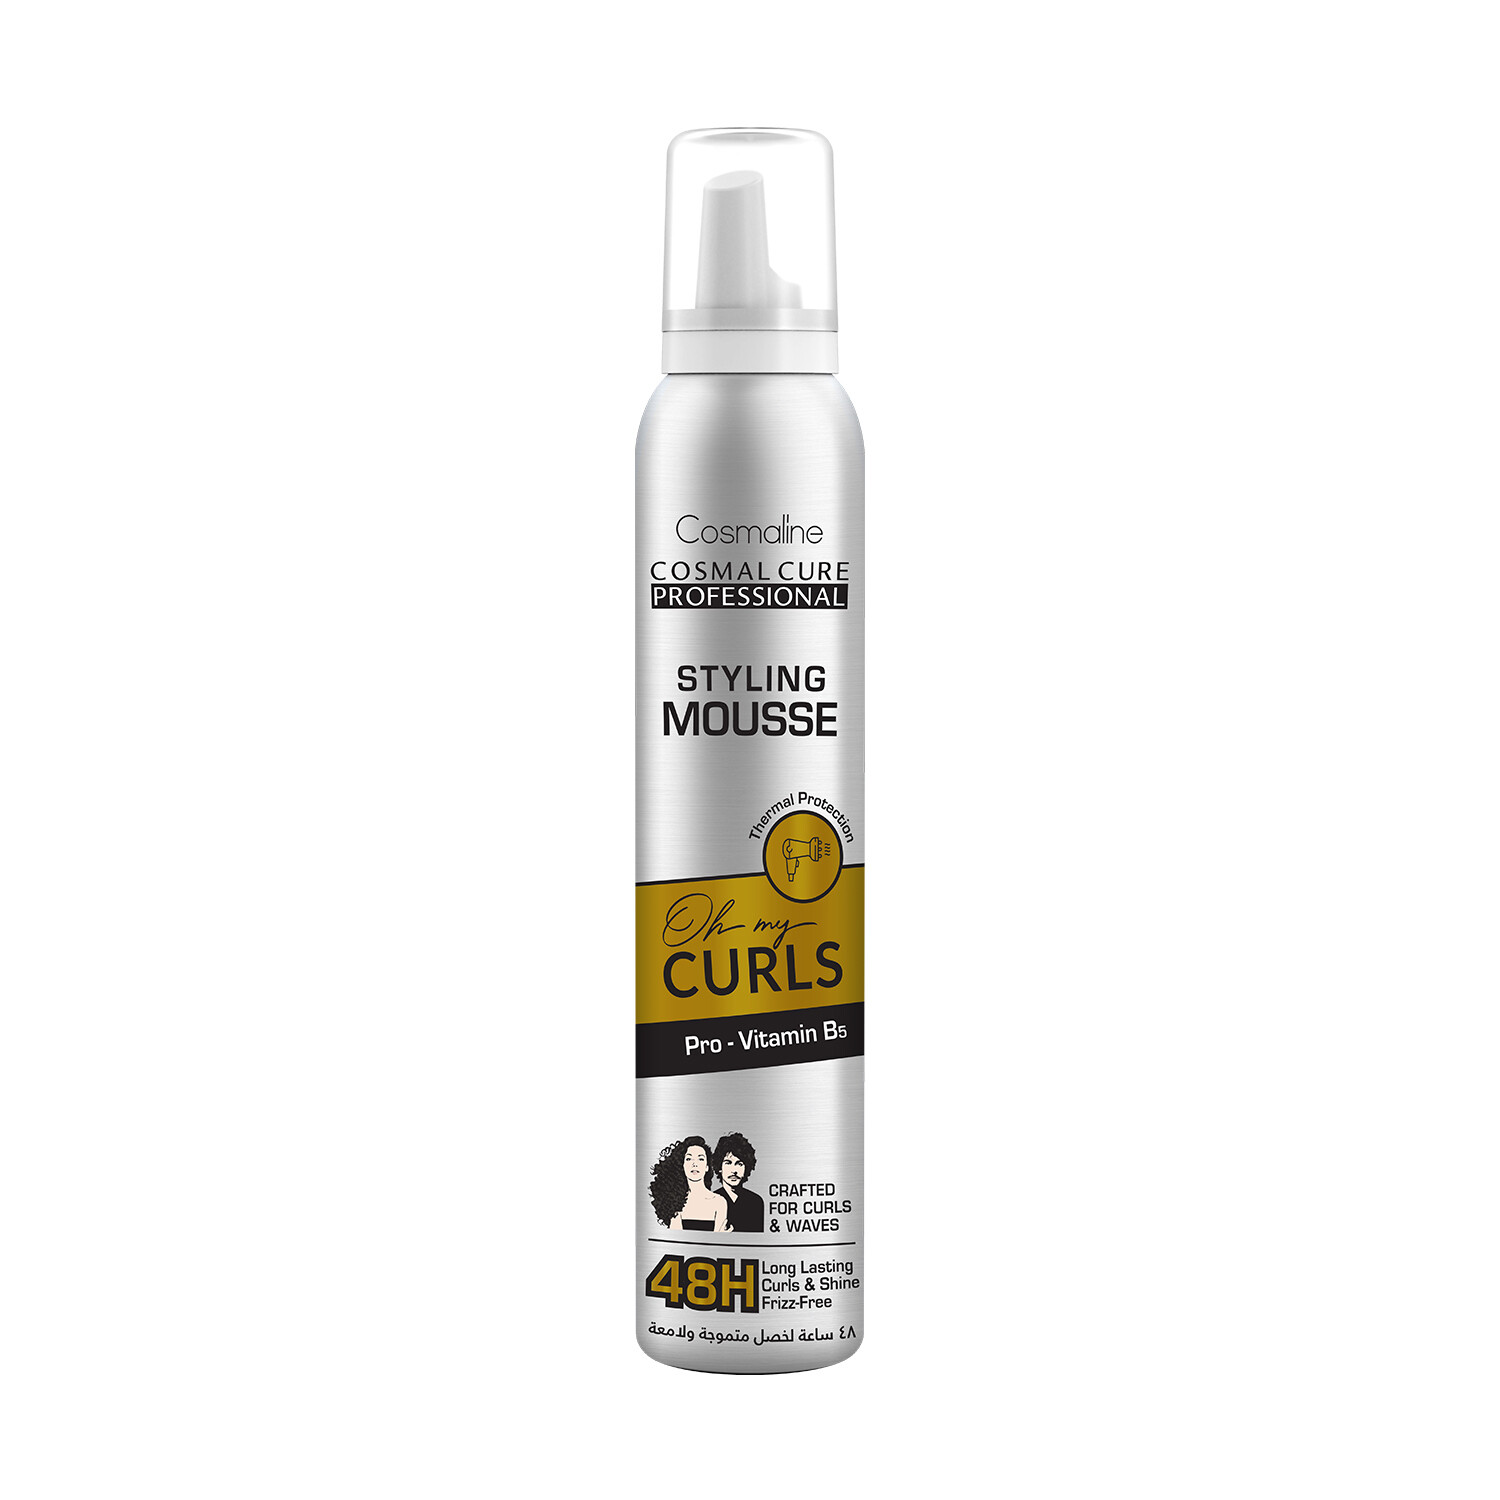 COSMAL CURE PROFESSIONAL OH MY CURLS STYLING MOUSSE Pro - Vitamin B5 200ml